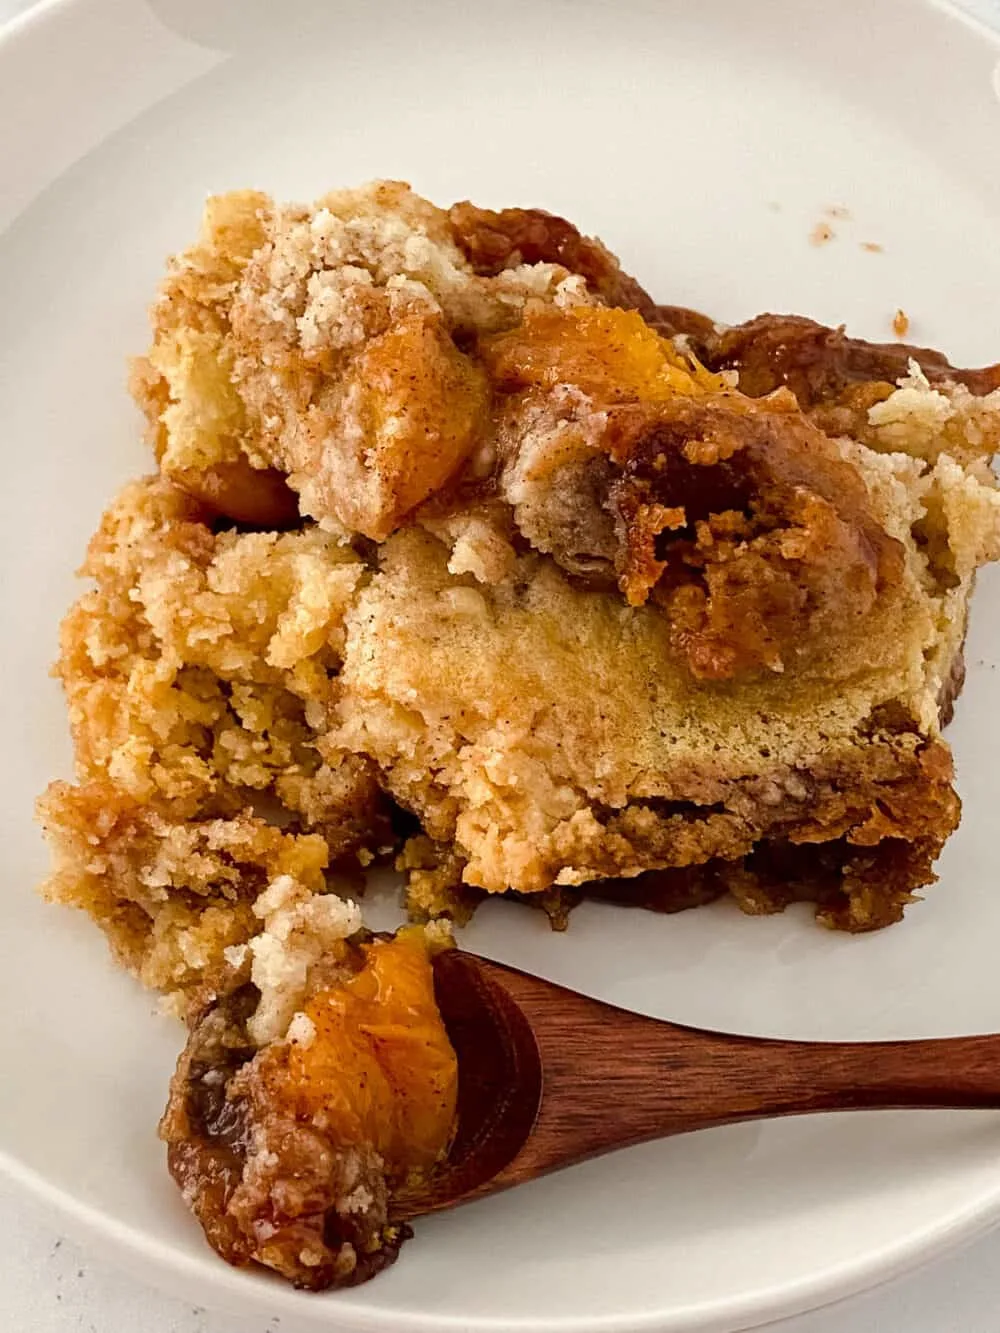 My Cake Mix Peach Cobbler is absolutely delectable. Whenever I make it, it’s eaten up in a matter of minutes. It’s amazing to see how far a box of cake mix can take you!